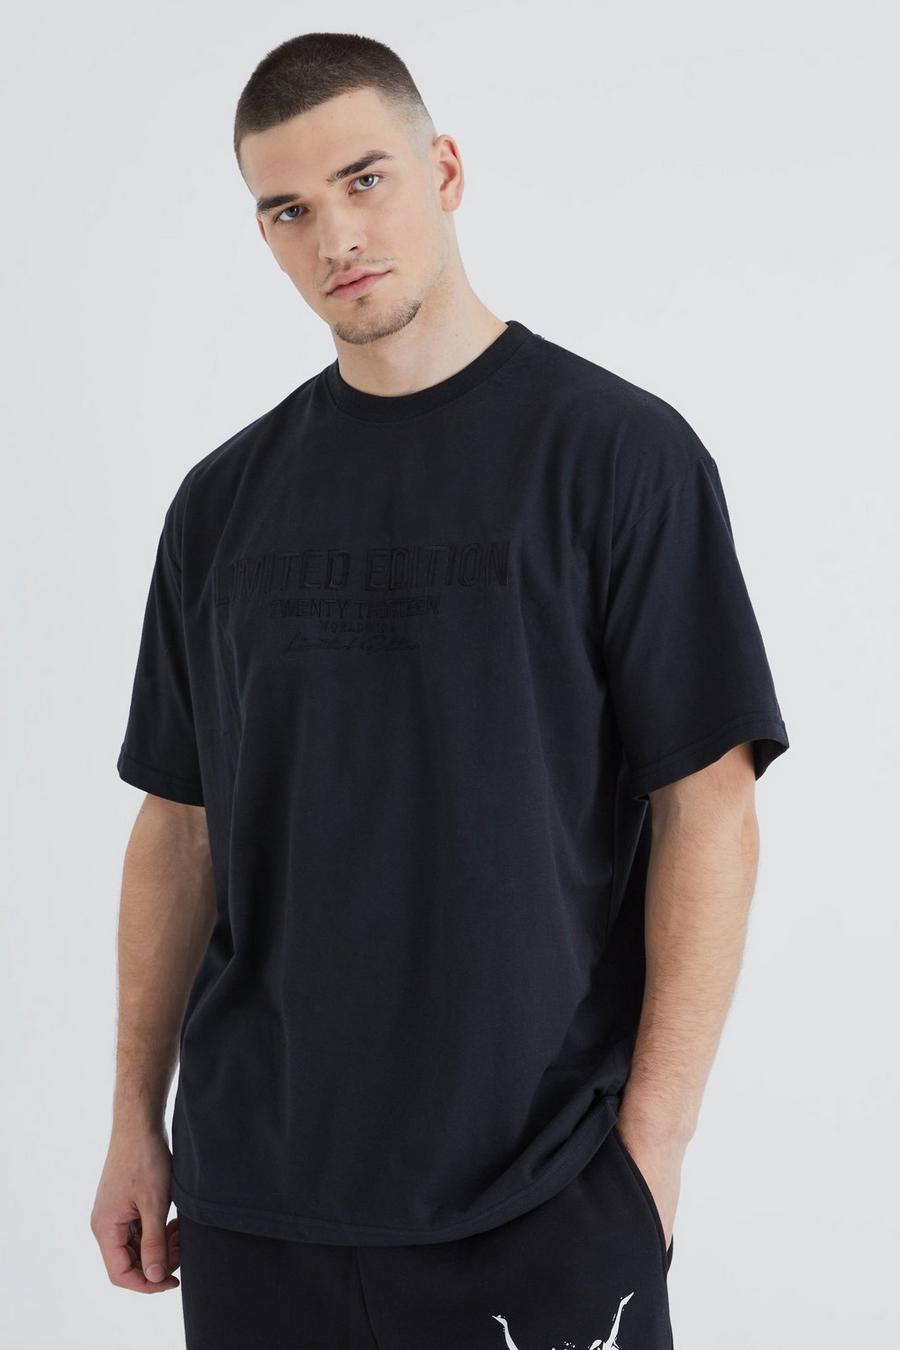 Black Tall Slim Embroidered Limited Edition T-shirt